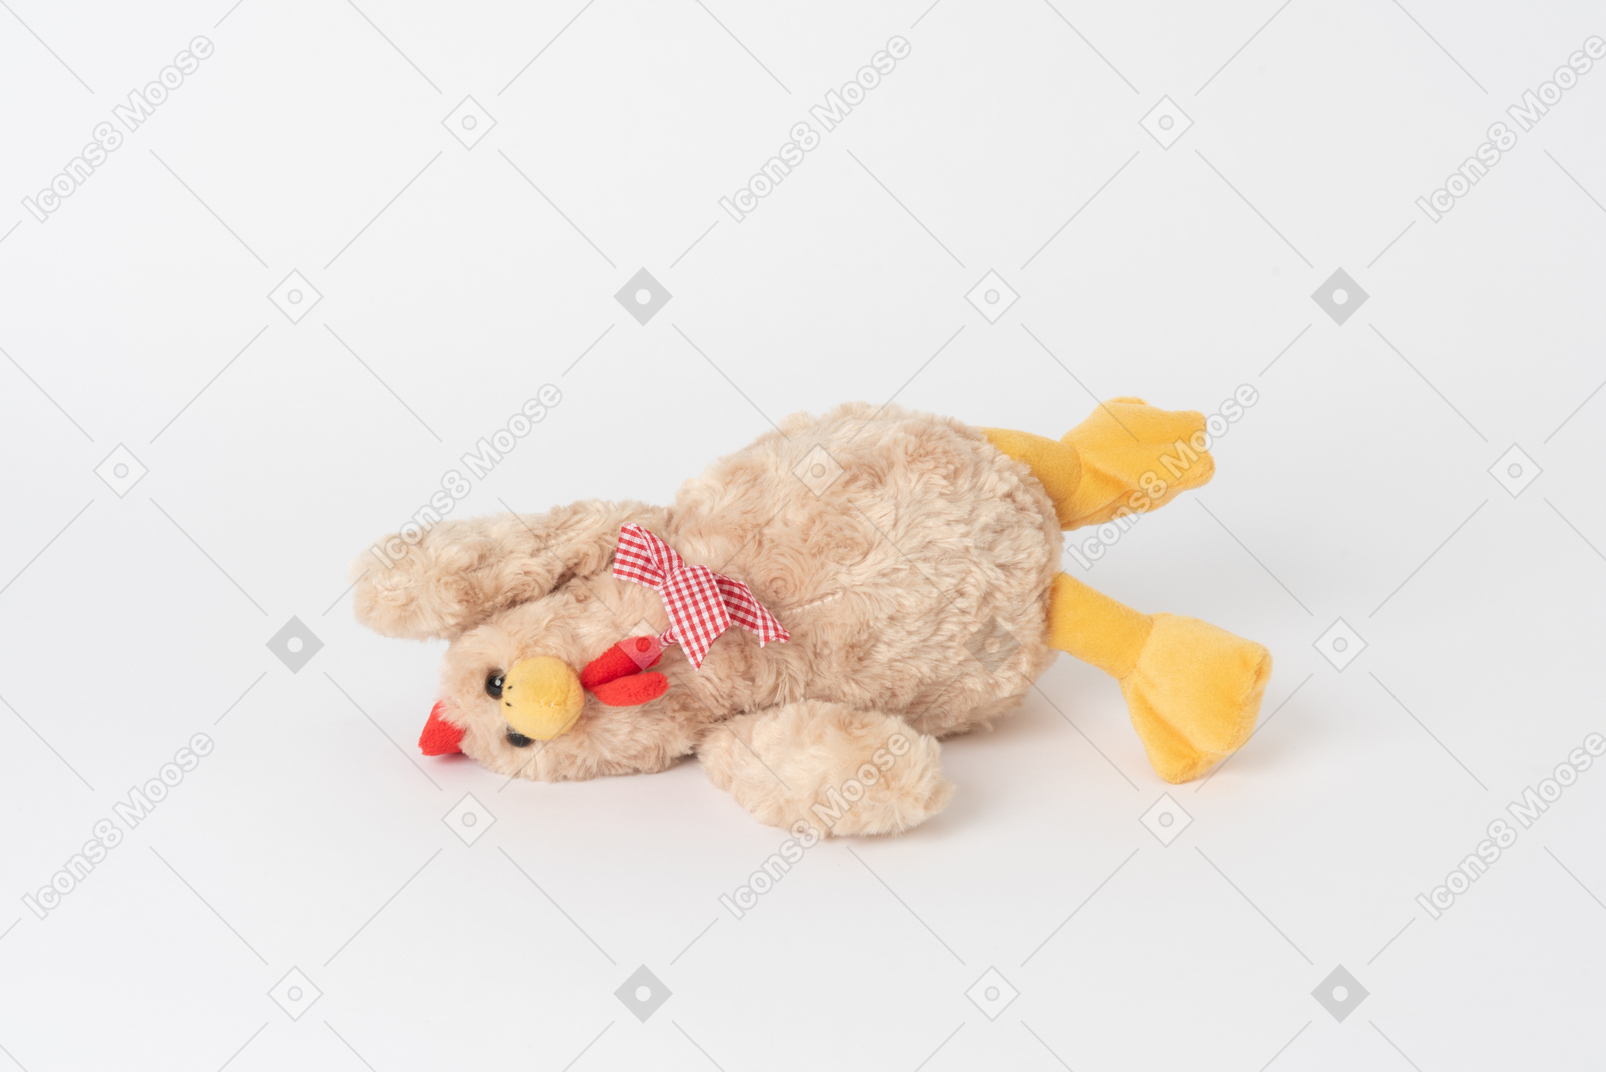 A plush chicken toy lying isolated against a plain white background